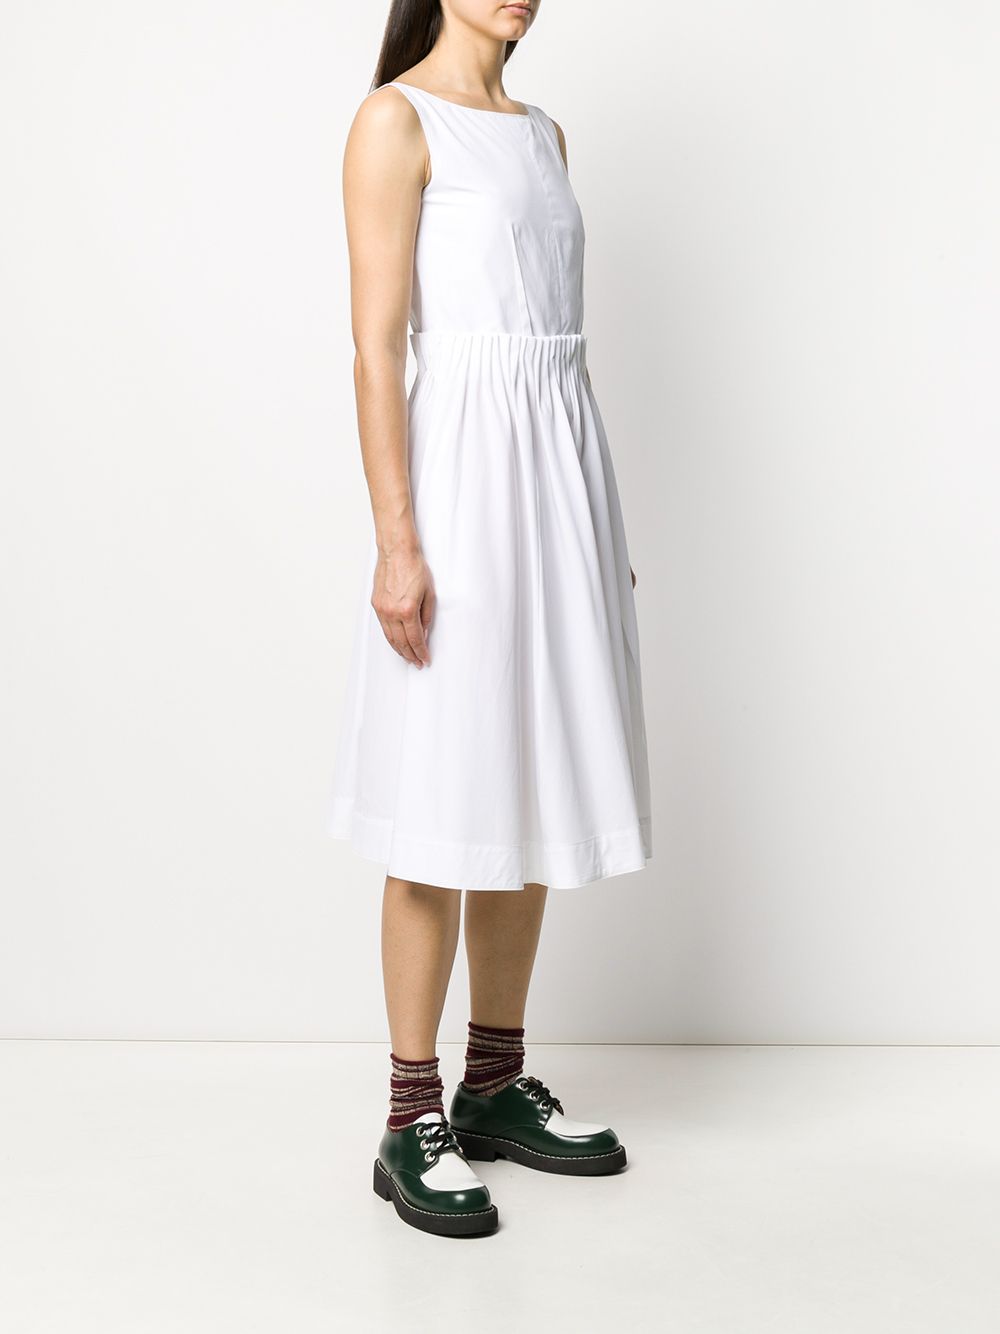 Shop Marni back buttons poplin dress with Express Delivery - FARFETCH